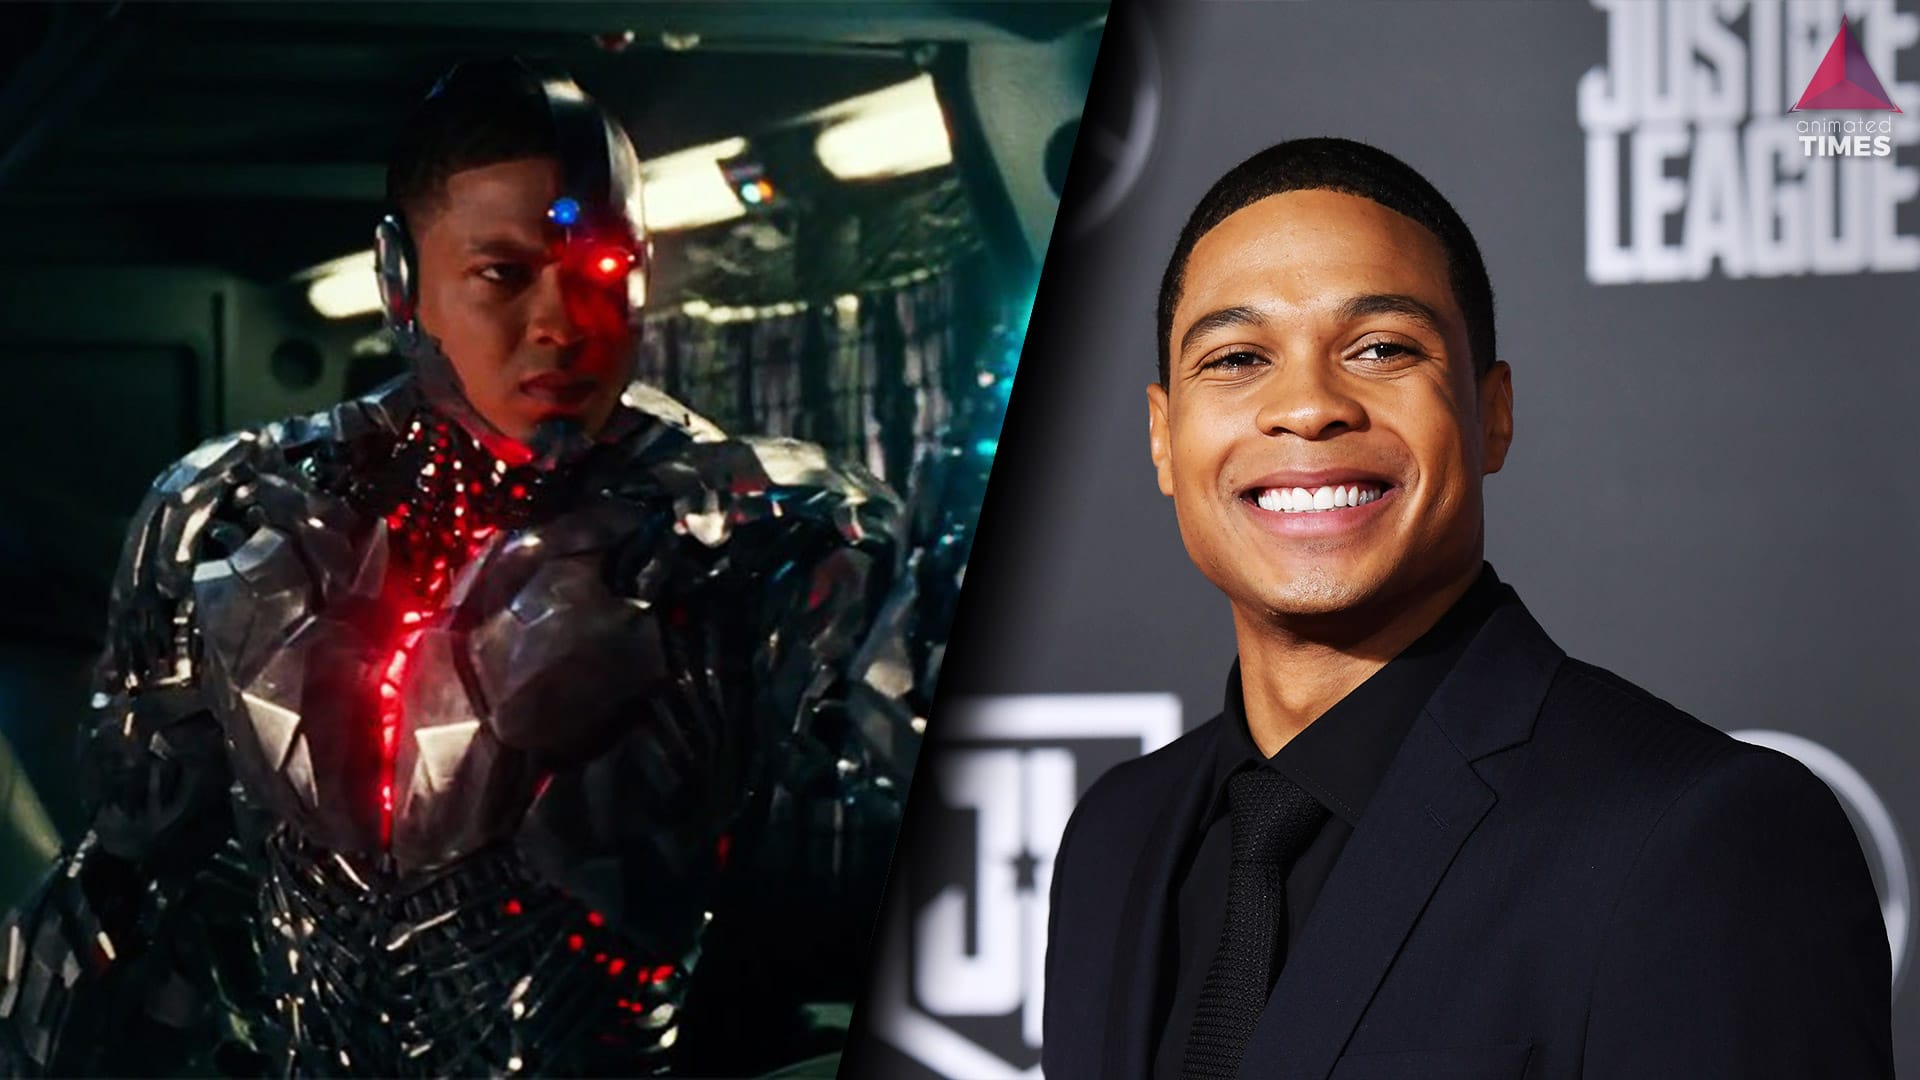 WarnerMedia Reveals Details About Their Investigation After Ray Fisher’s Allegations